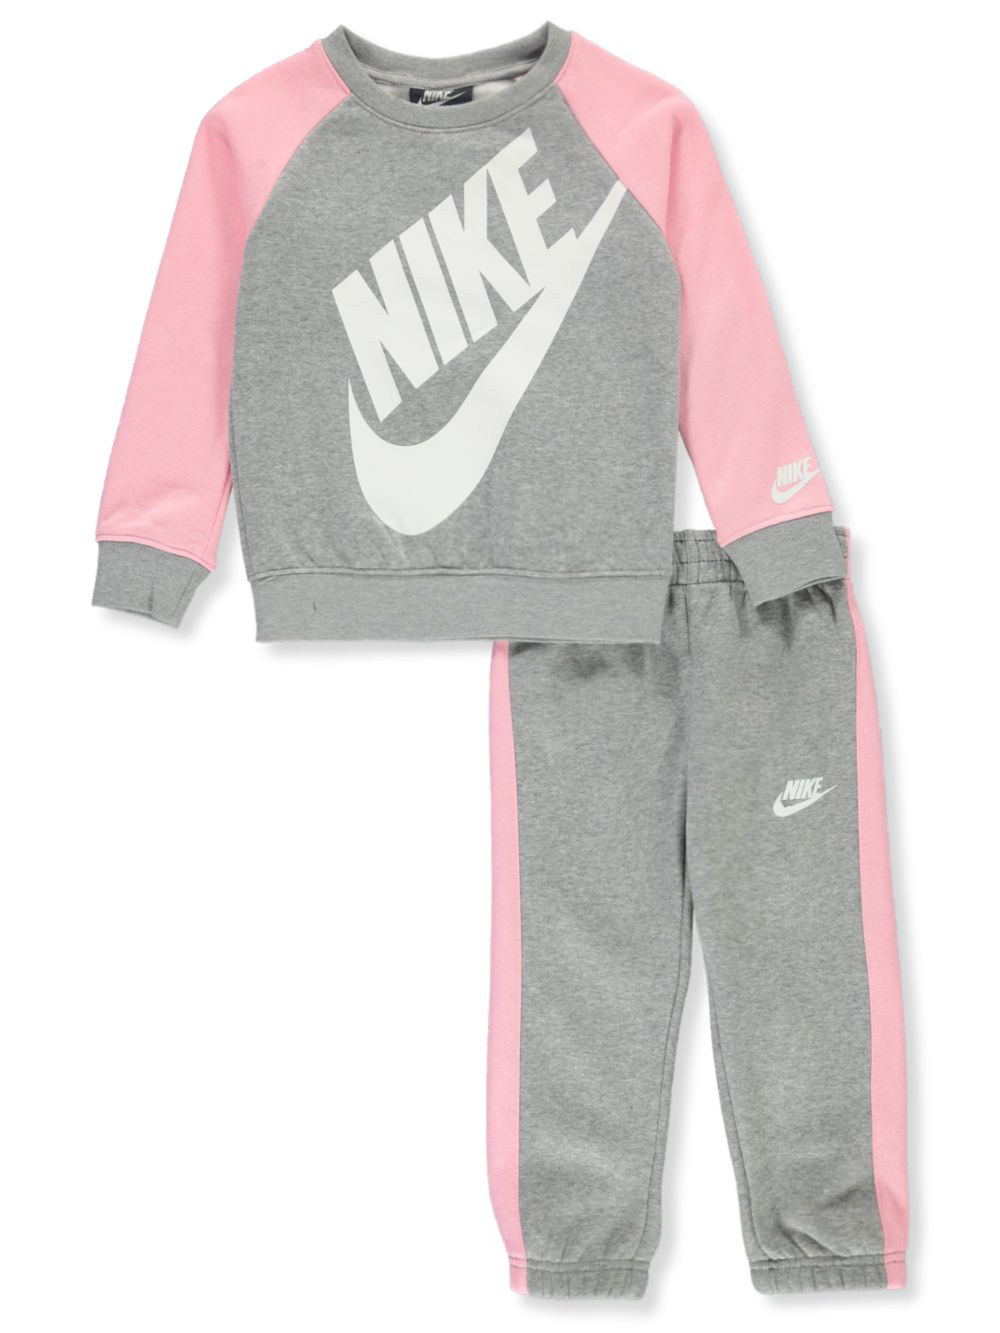 Girls' 2-Piece Sweatsuit Outfit by Nike 